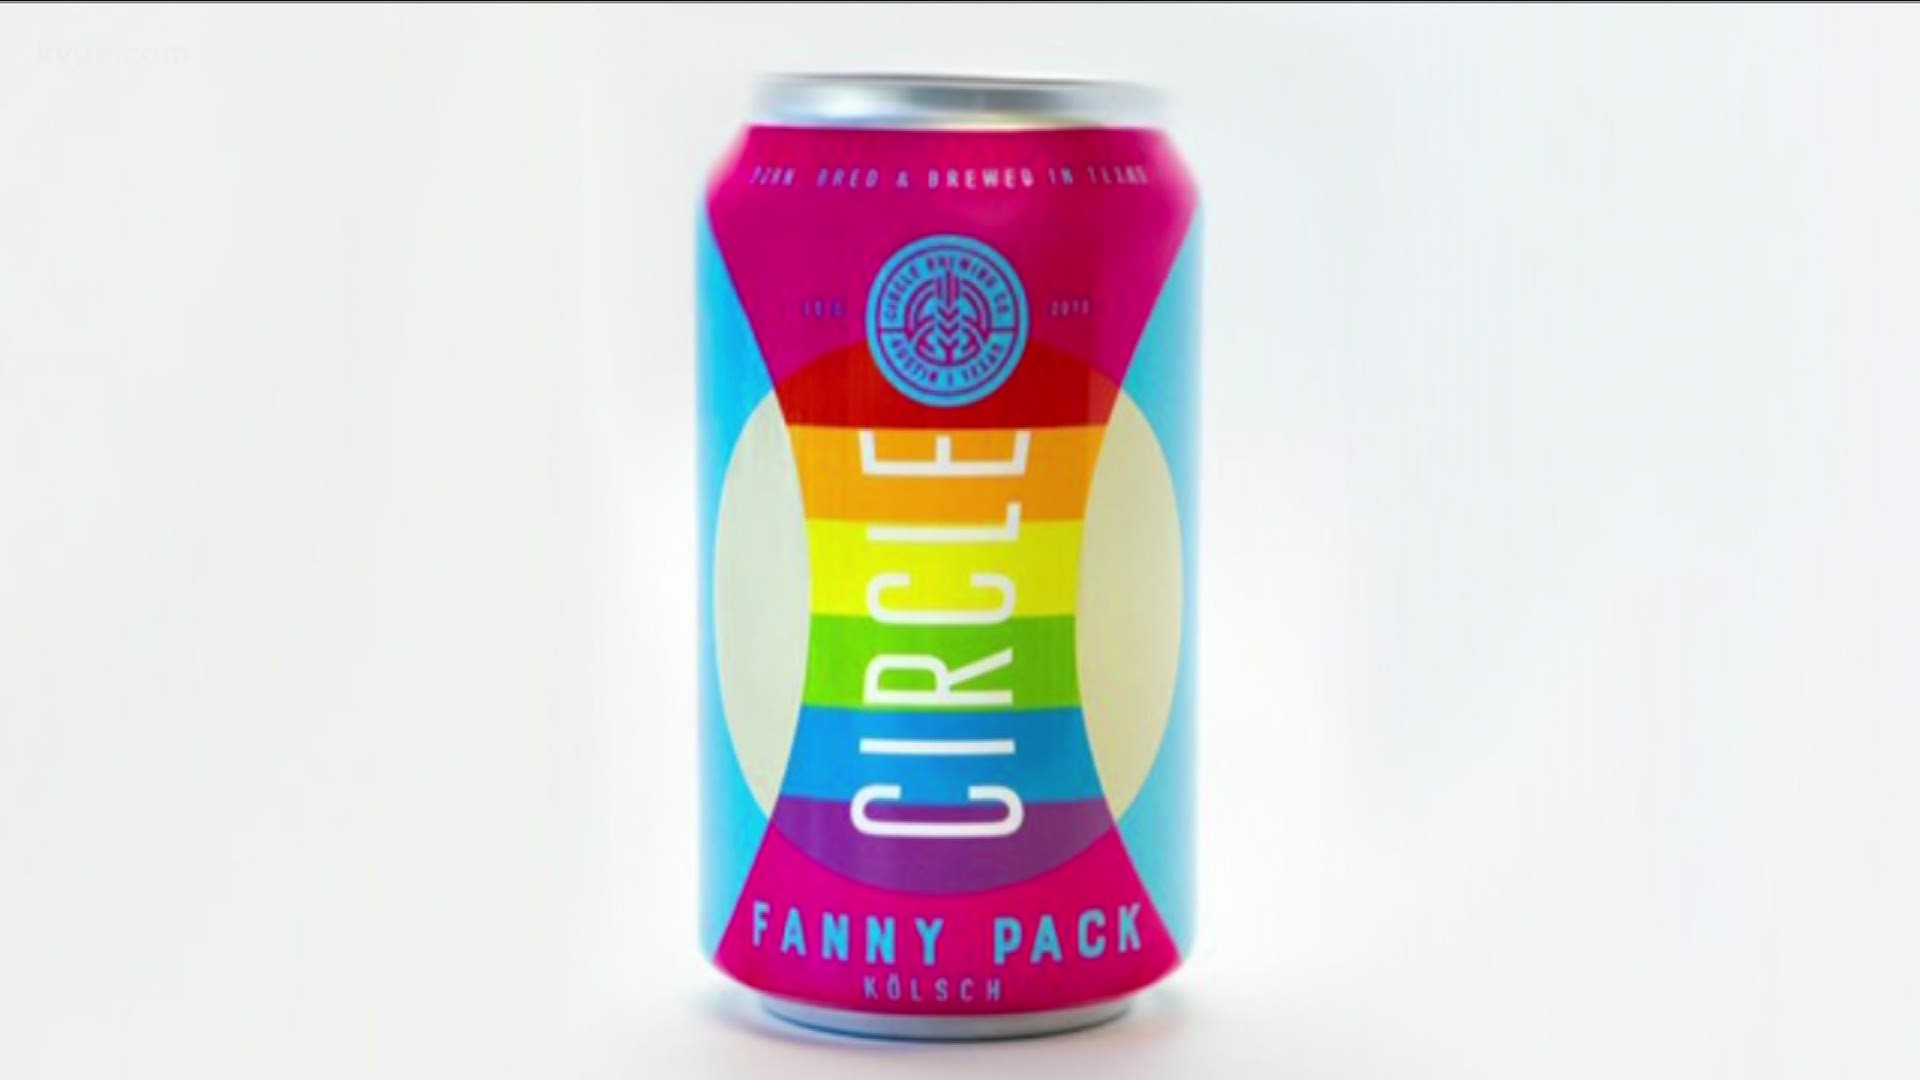 A reminder that Pride month kicks off in about one week, and Circle Brewing Company in North Austin just created this new rainbow label on their summer brew.